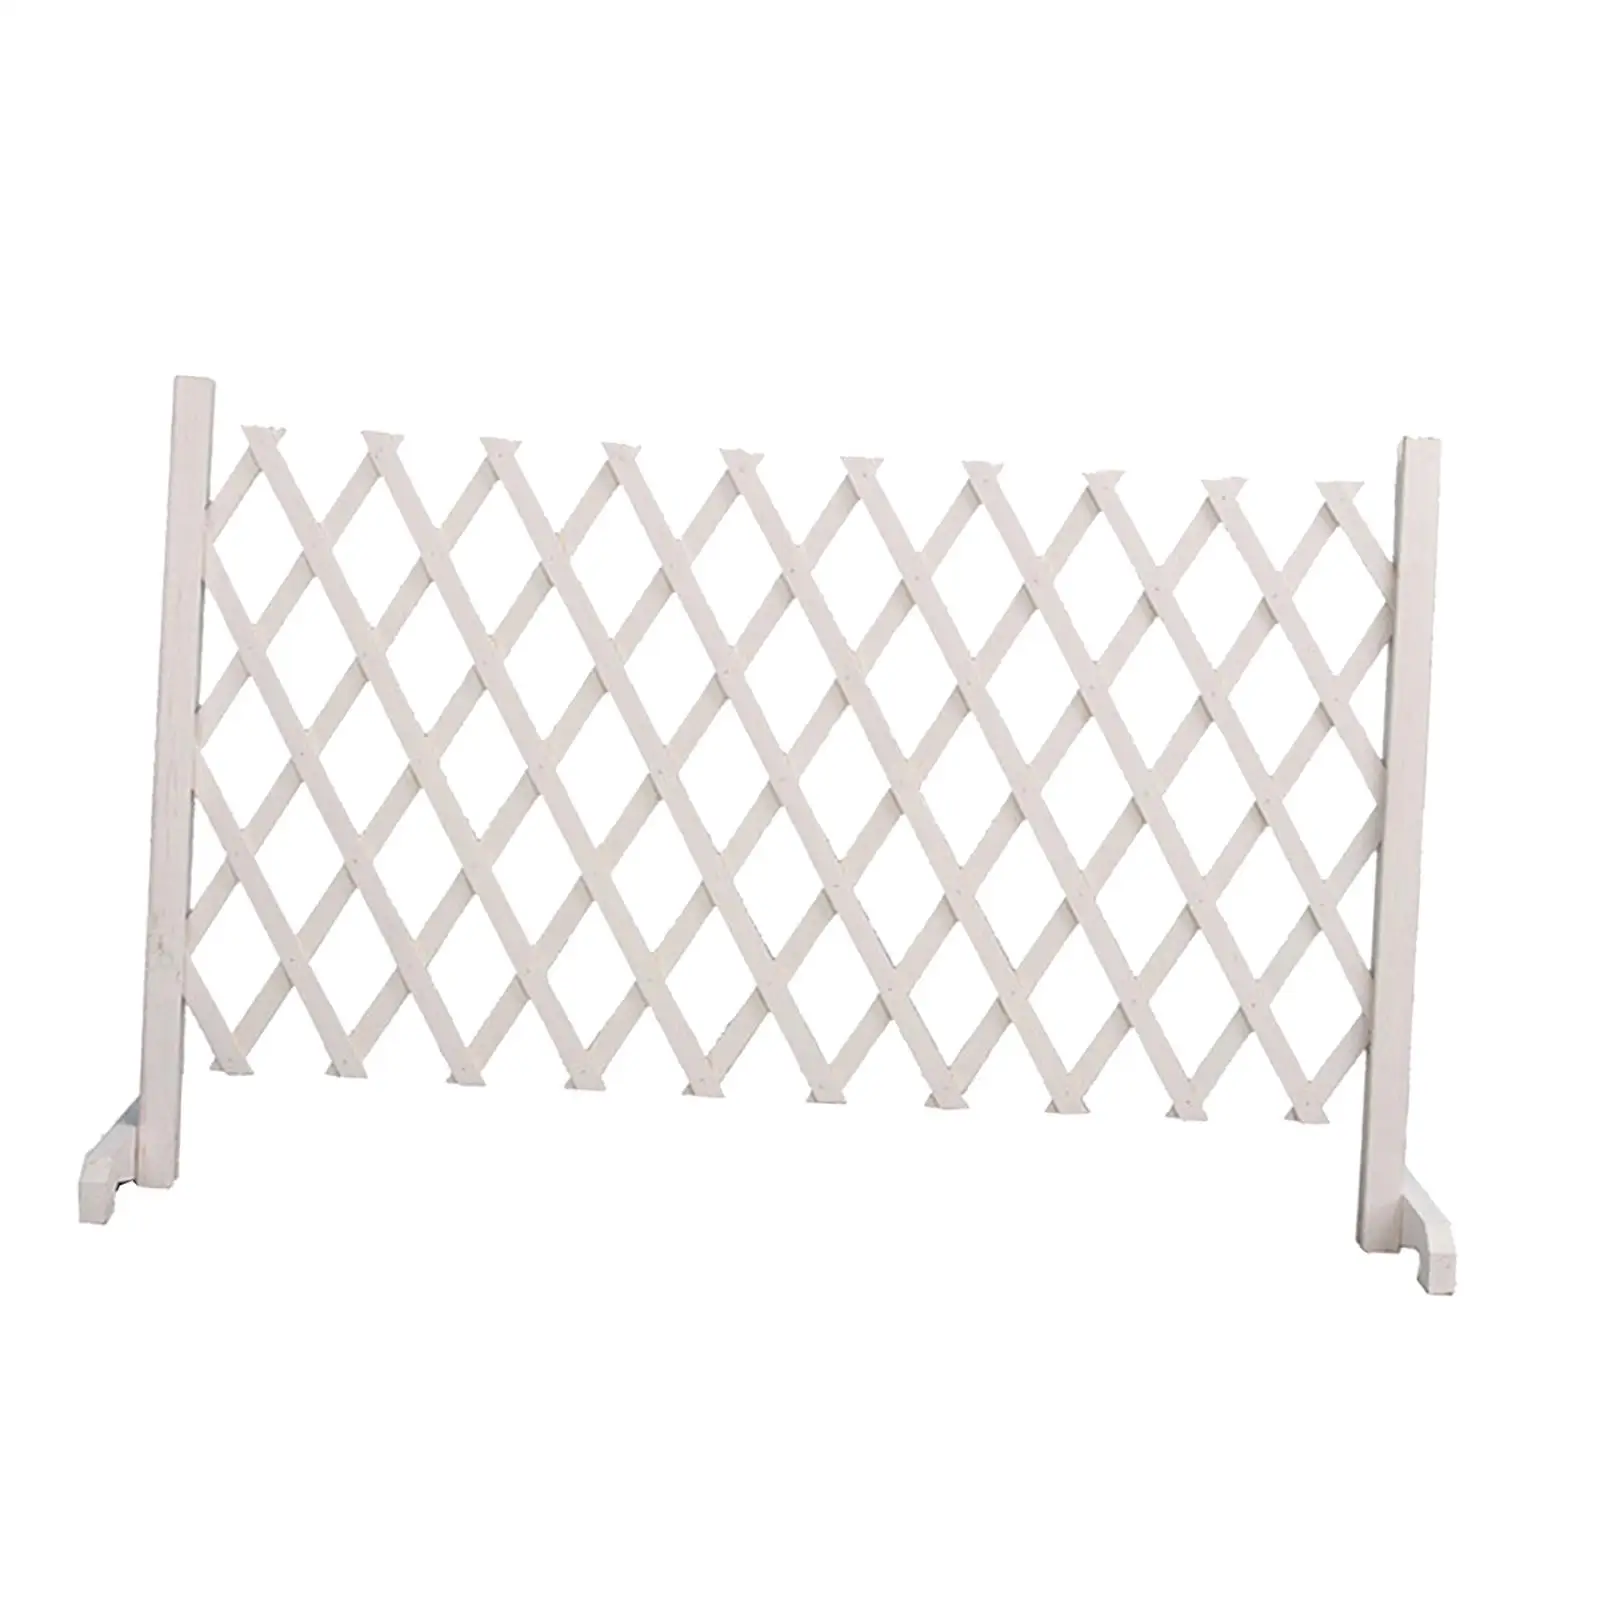 Wooden Dog Gate Expanding Retractable Barrier Folding Fence Pet Fence for Garden Lawn Doorway House Stairways Hall